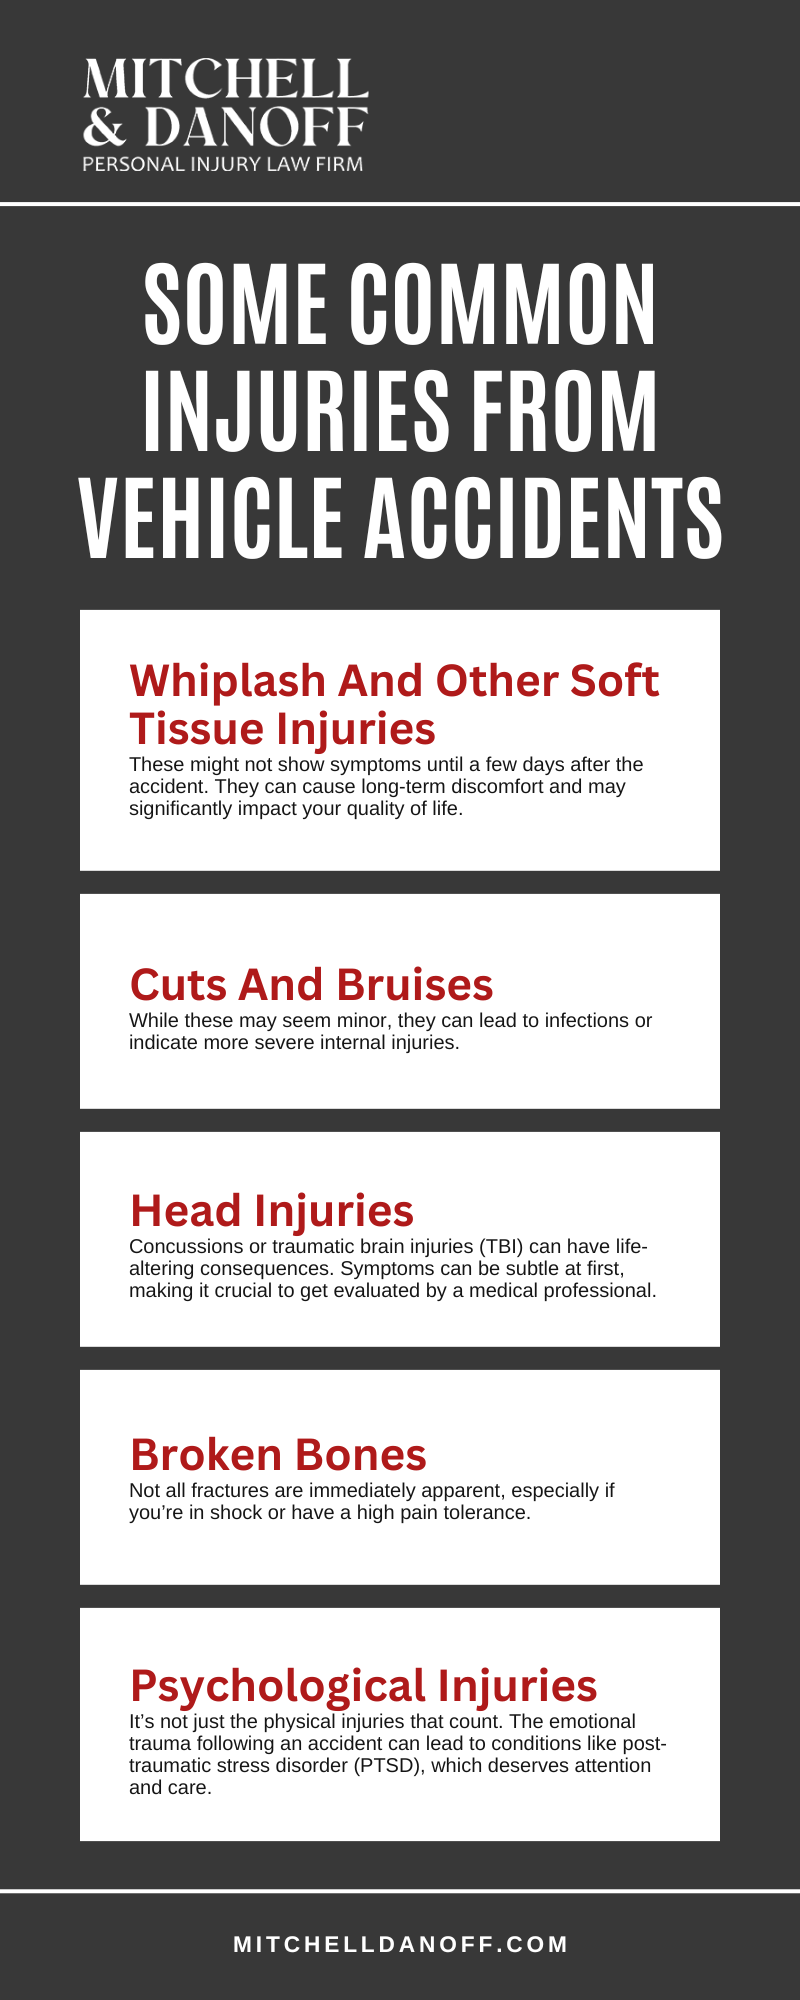 Some Common Injuries From Vehicle Accidents Infographic